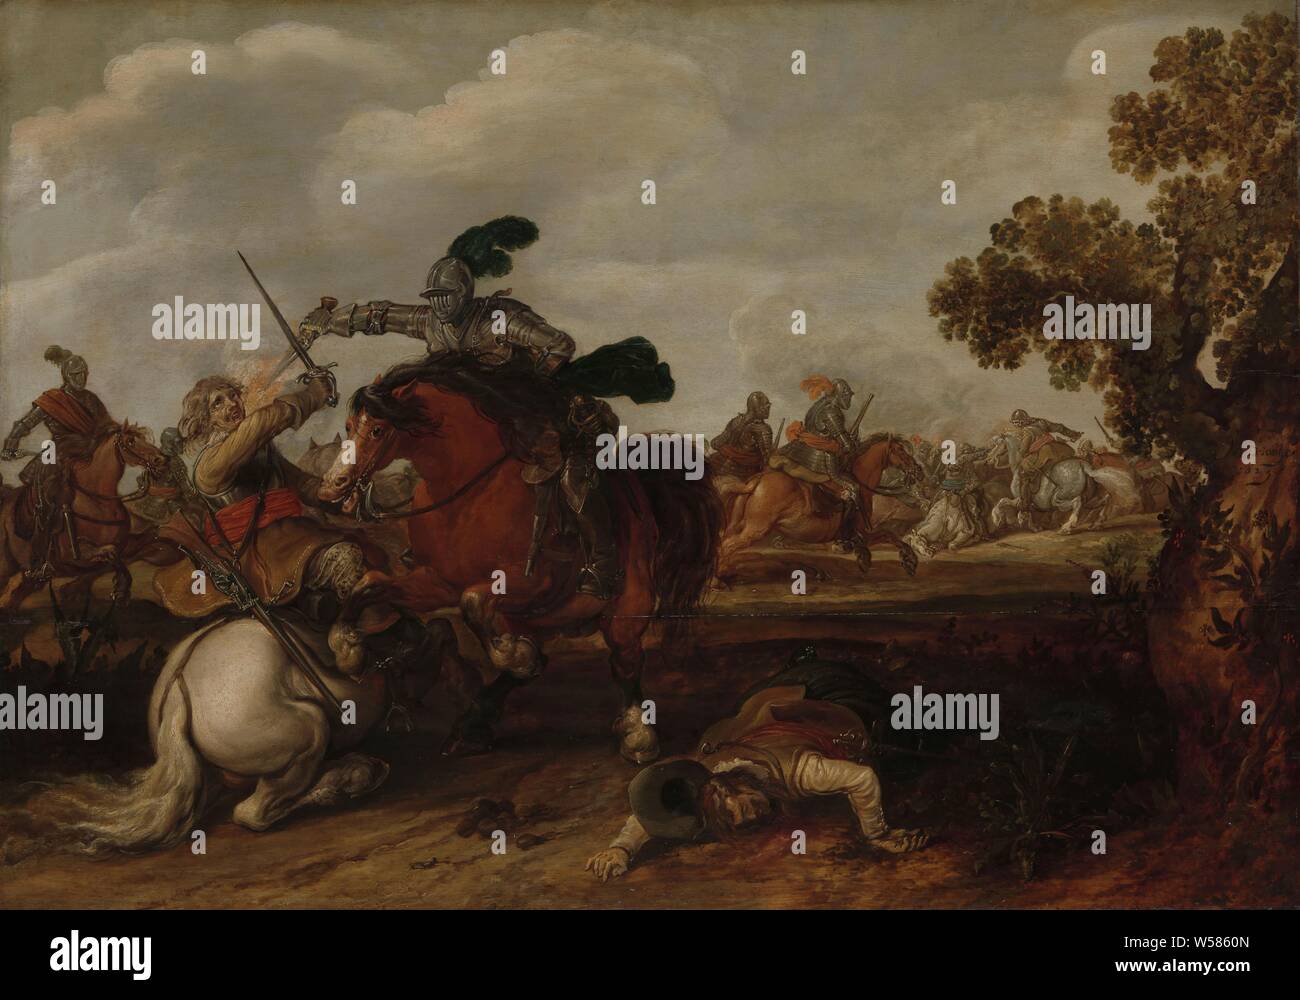 A Cavalry Charge, Equestrian Fight. A rider in armor shoots with his gun at a rider on a white horse. In the foreground lies the body of a fallen man, in the background the battle rages, battle, fighting in general (cavalry, horsemen), horse throwing rider, Jan Martszen de Jonge (mentioned on object), 1629, panel, oil paint (paint), h 75.5 cm × w 107 cm d 6.5 cm Stock Photo